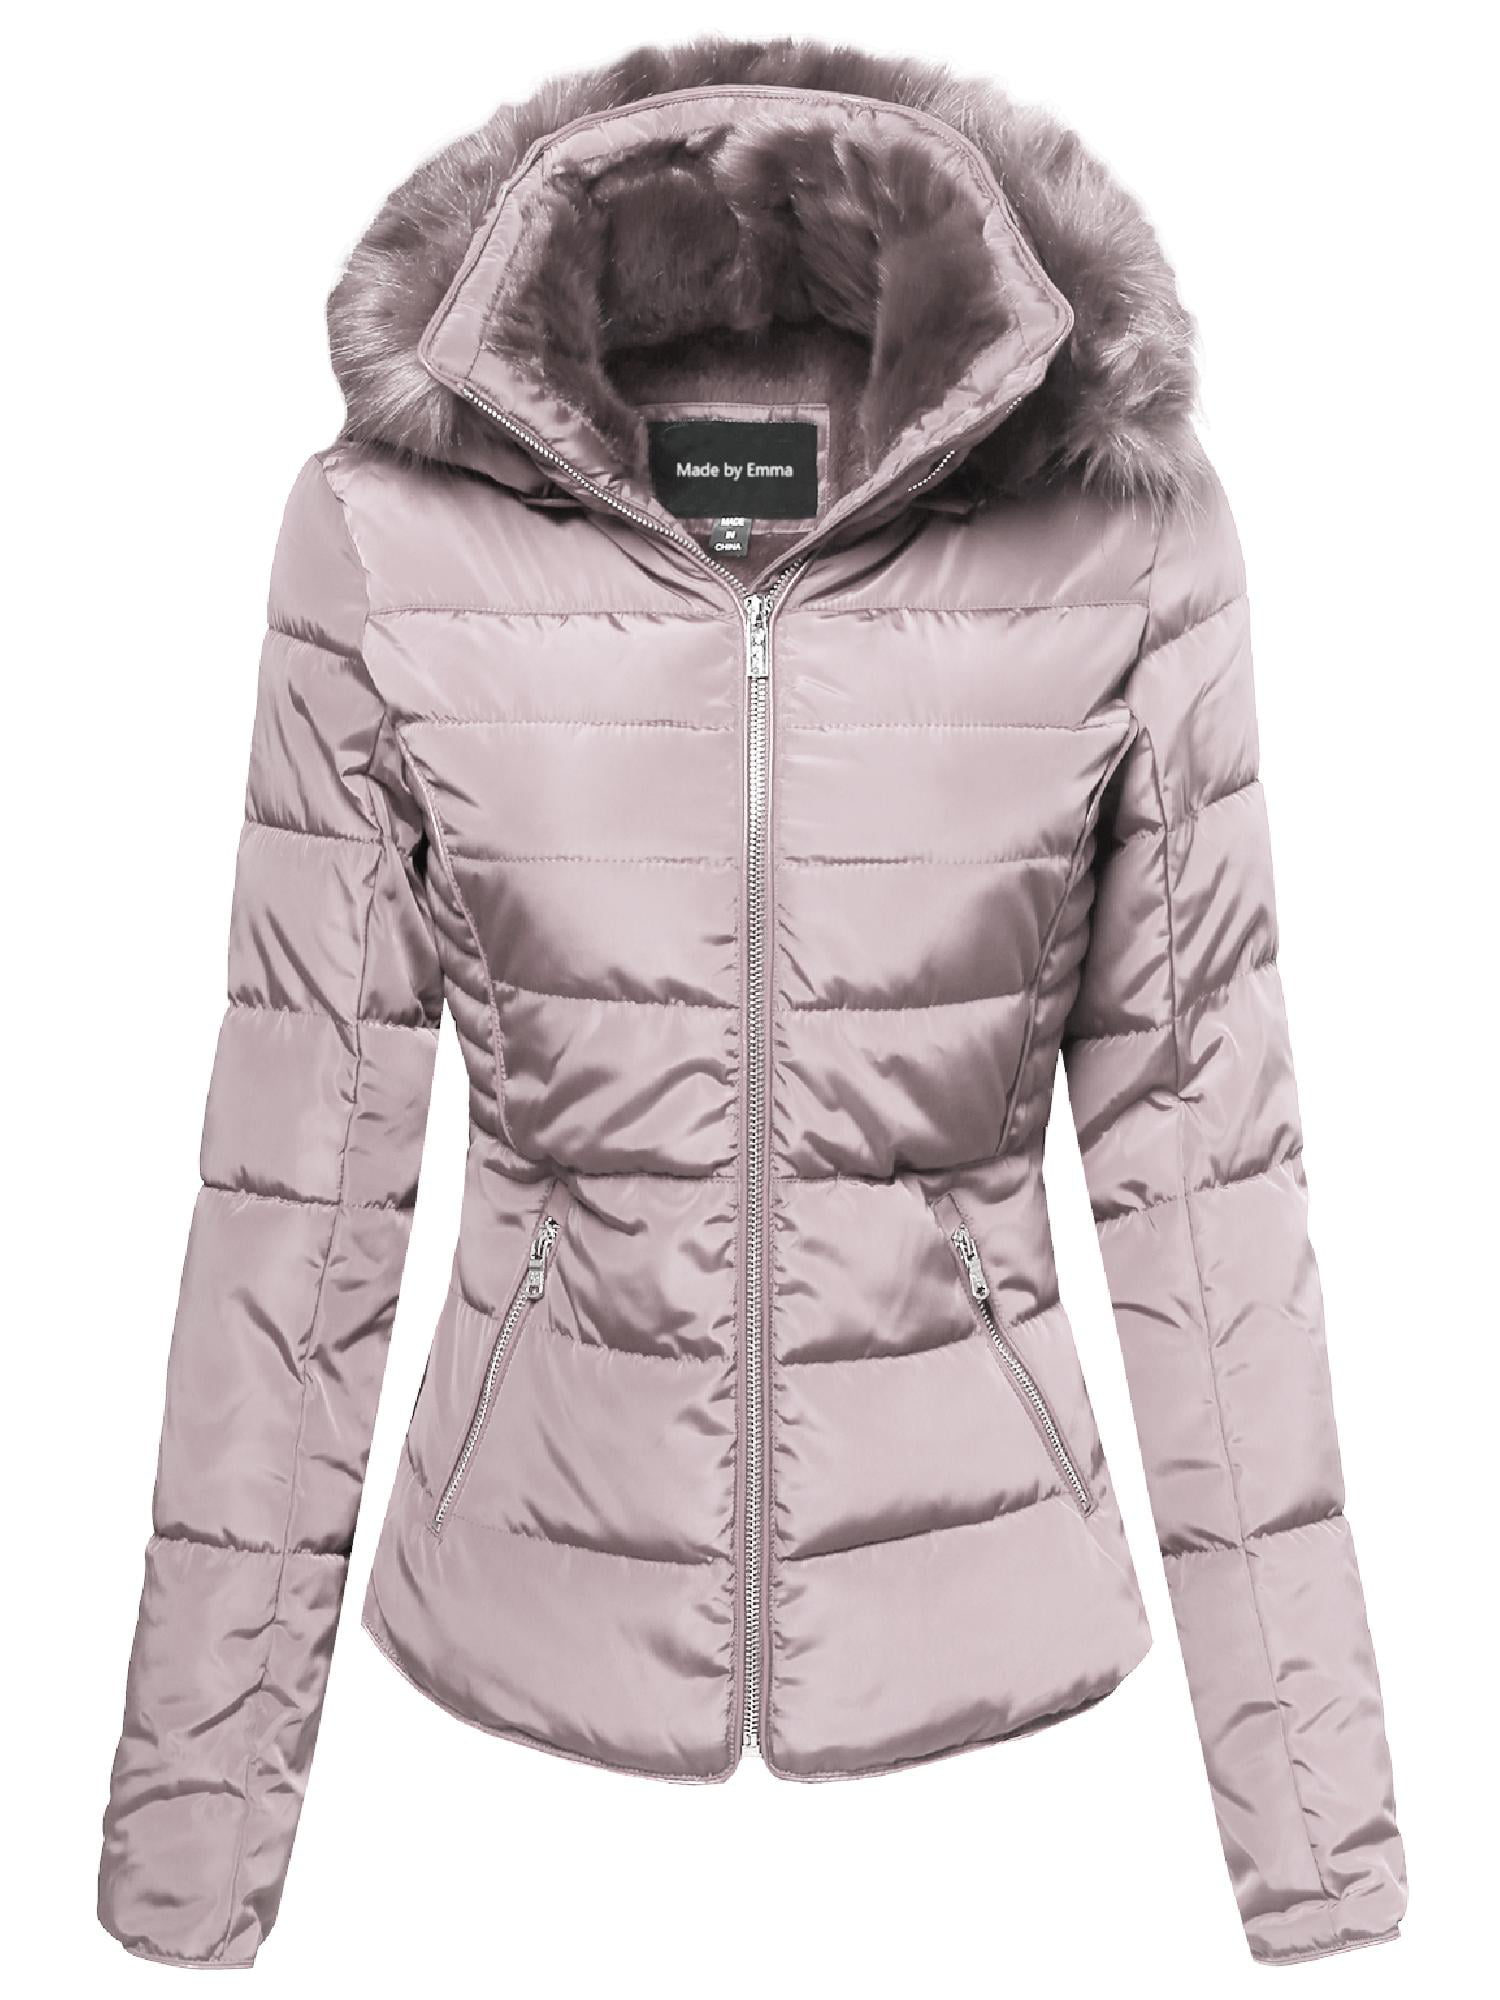 FashionOutfit - FashionOutfit Women's Quilted Puffer Jacket with